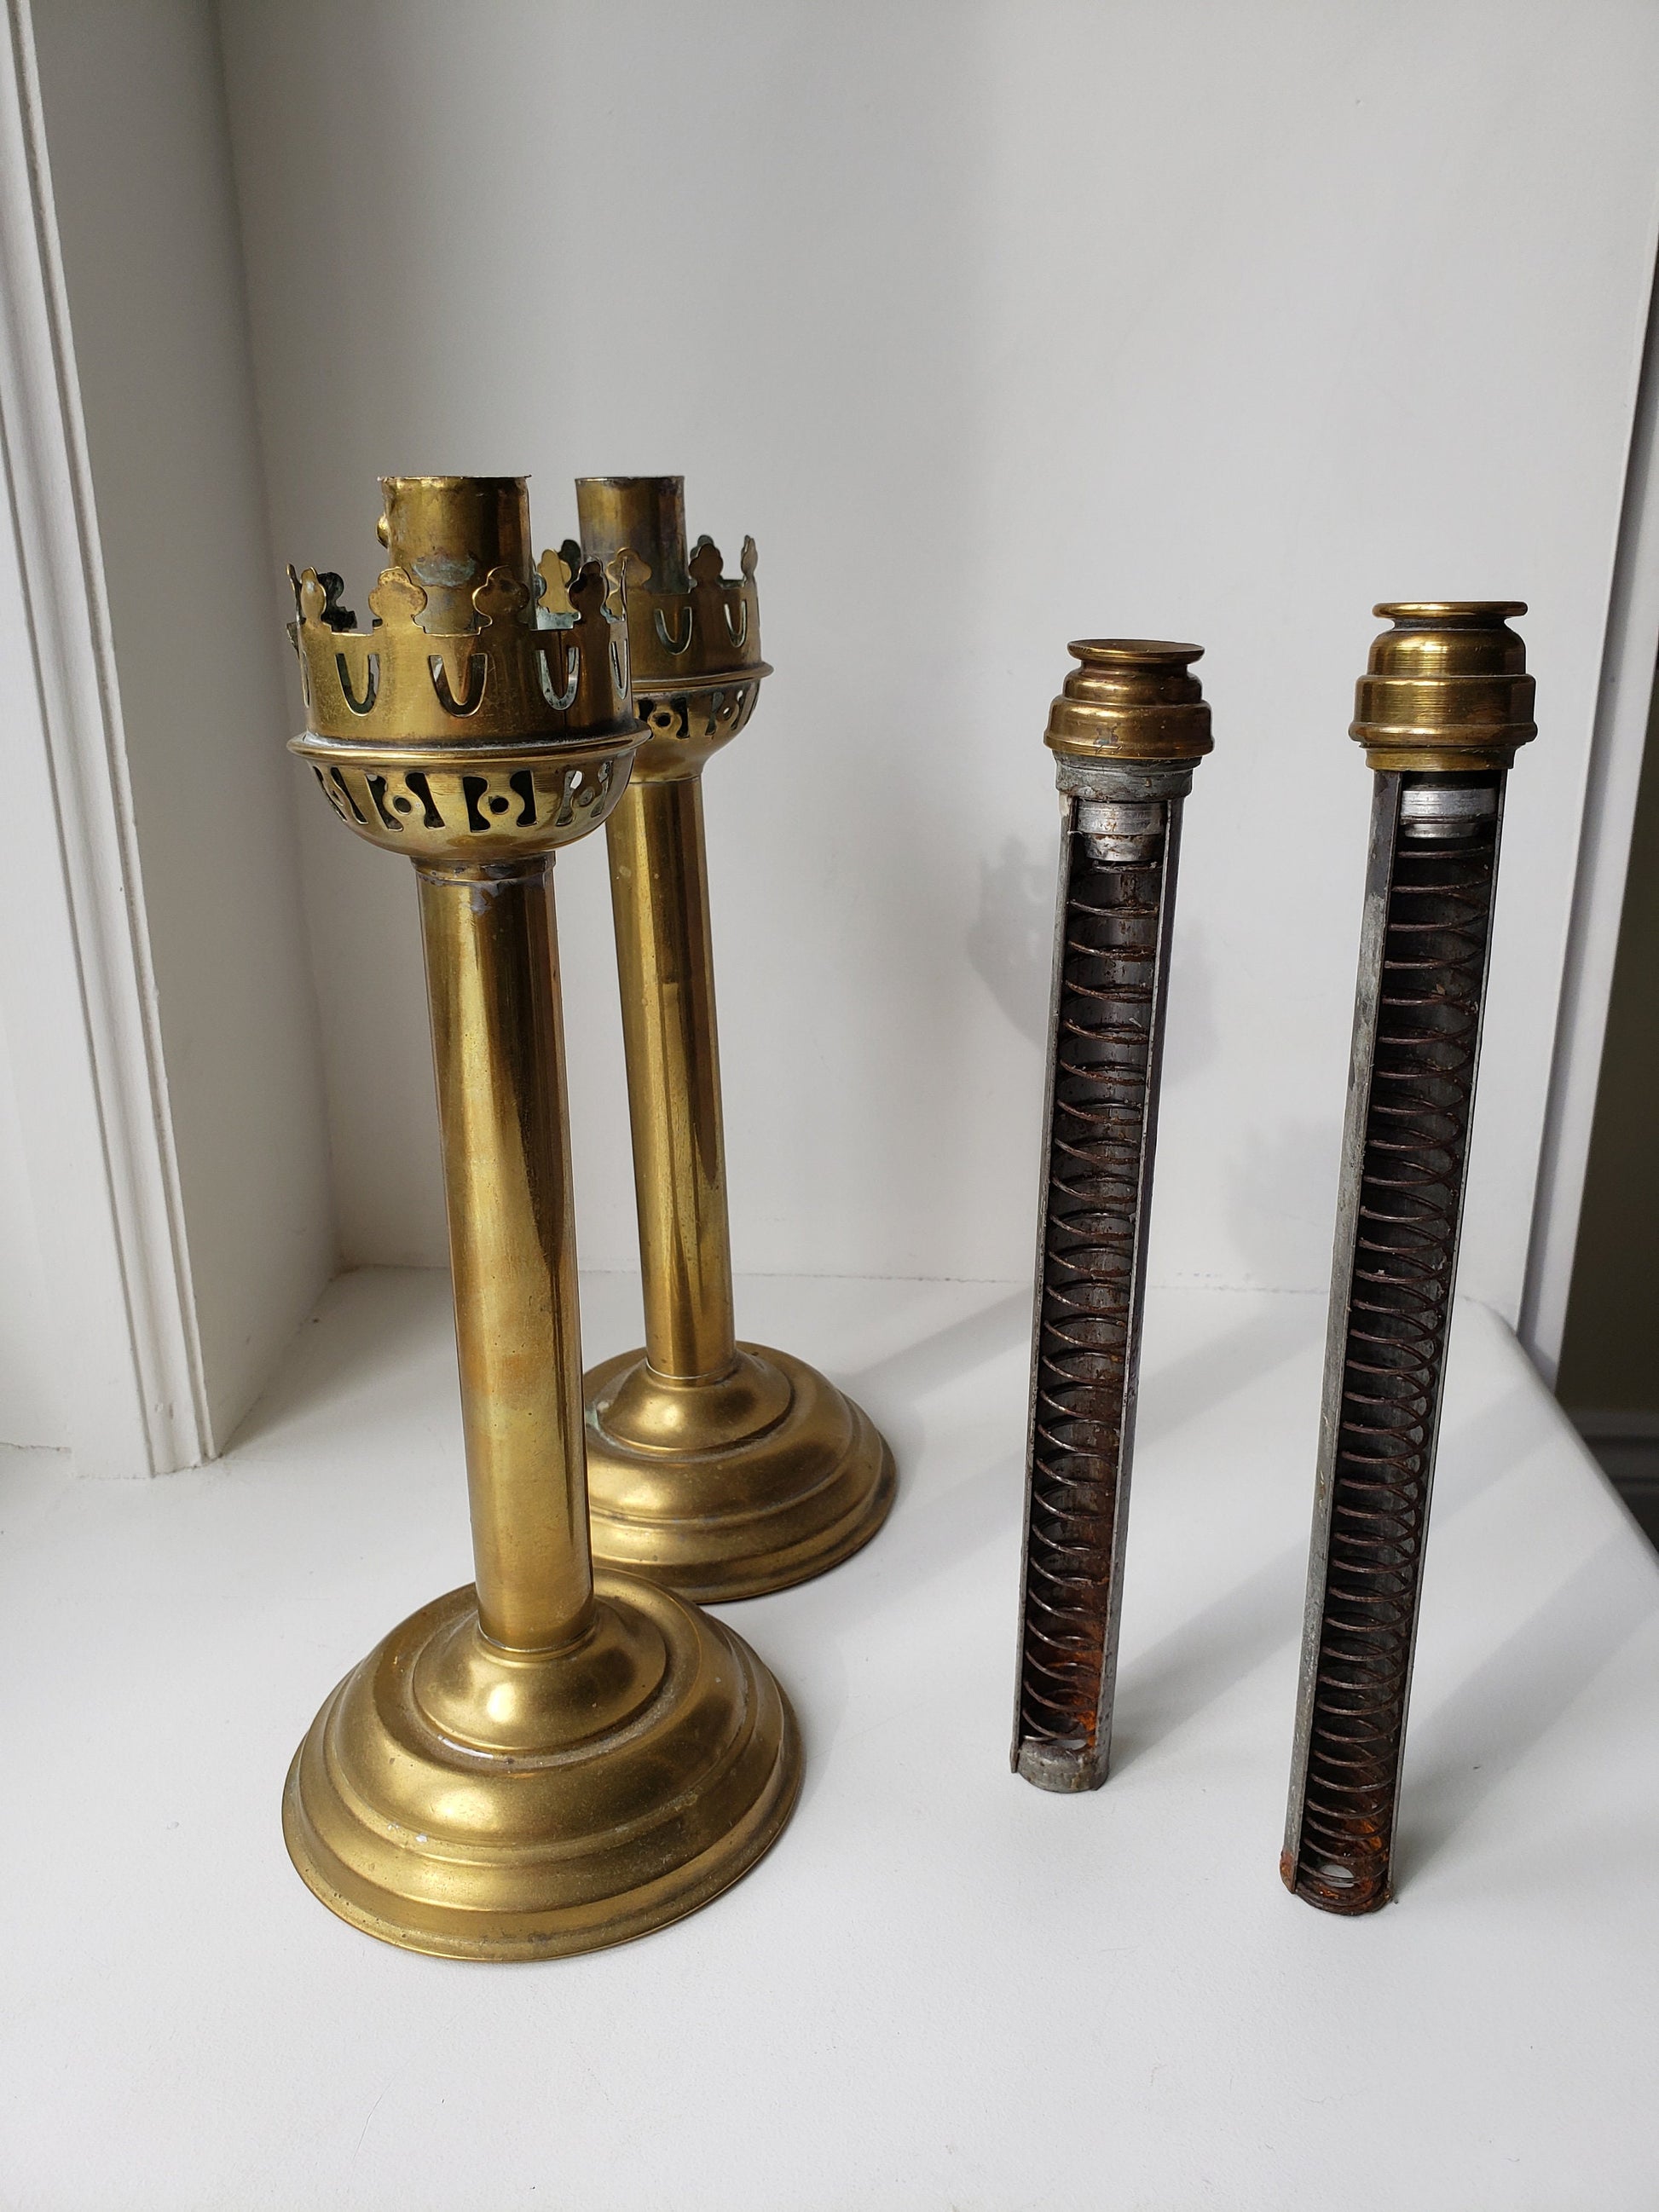 Antique Pair of Nautical Spring Loaded Brass Candlesticks Candle